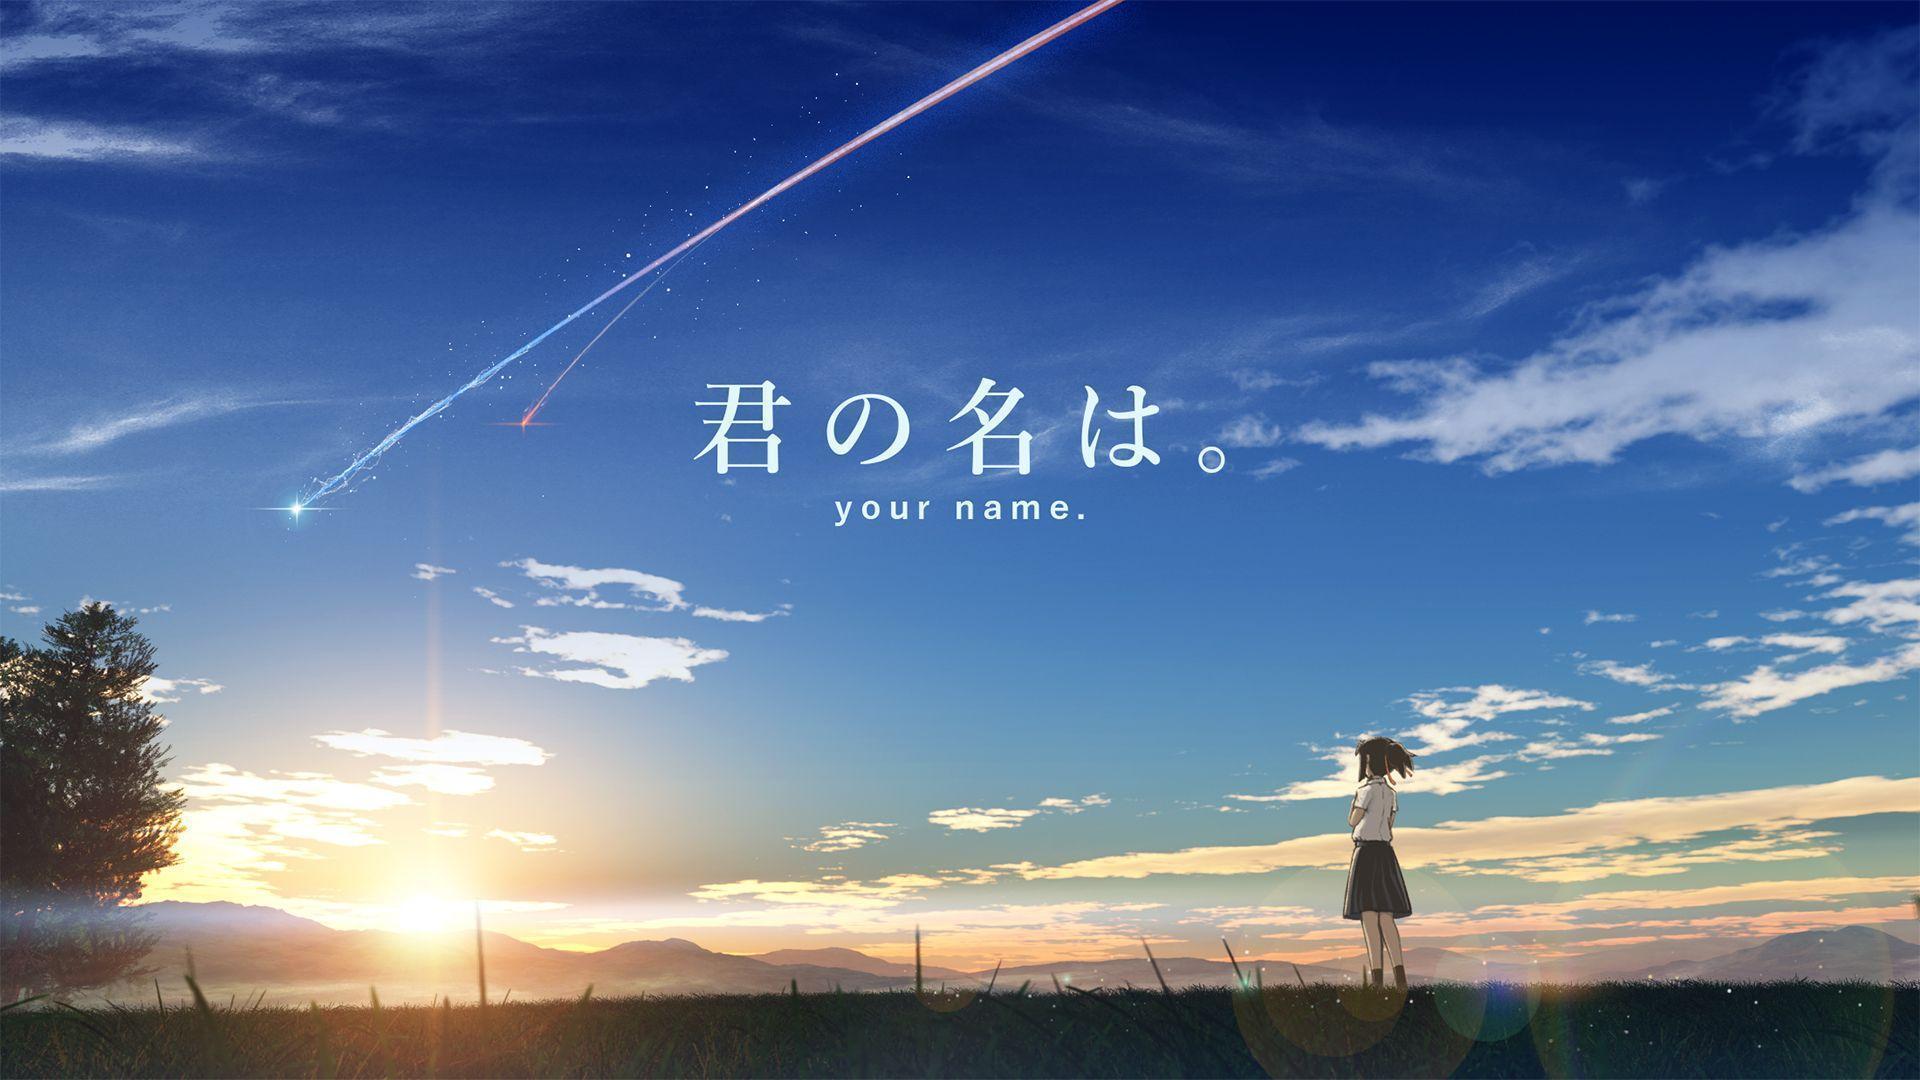 Your Name HD Wallpaper For Laptop